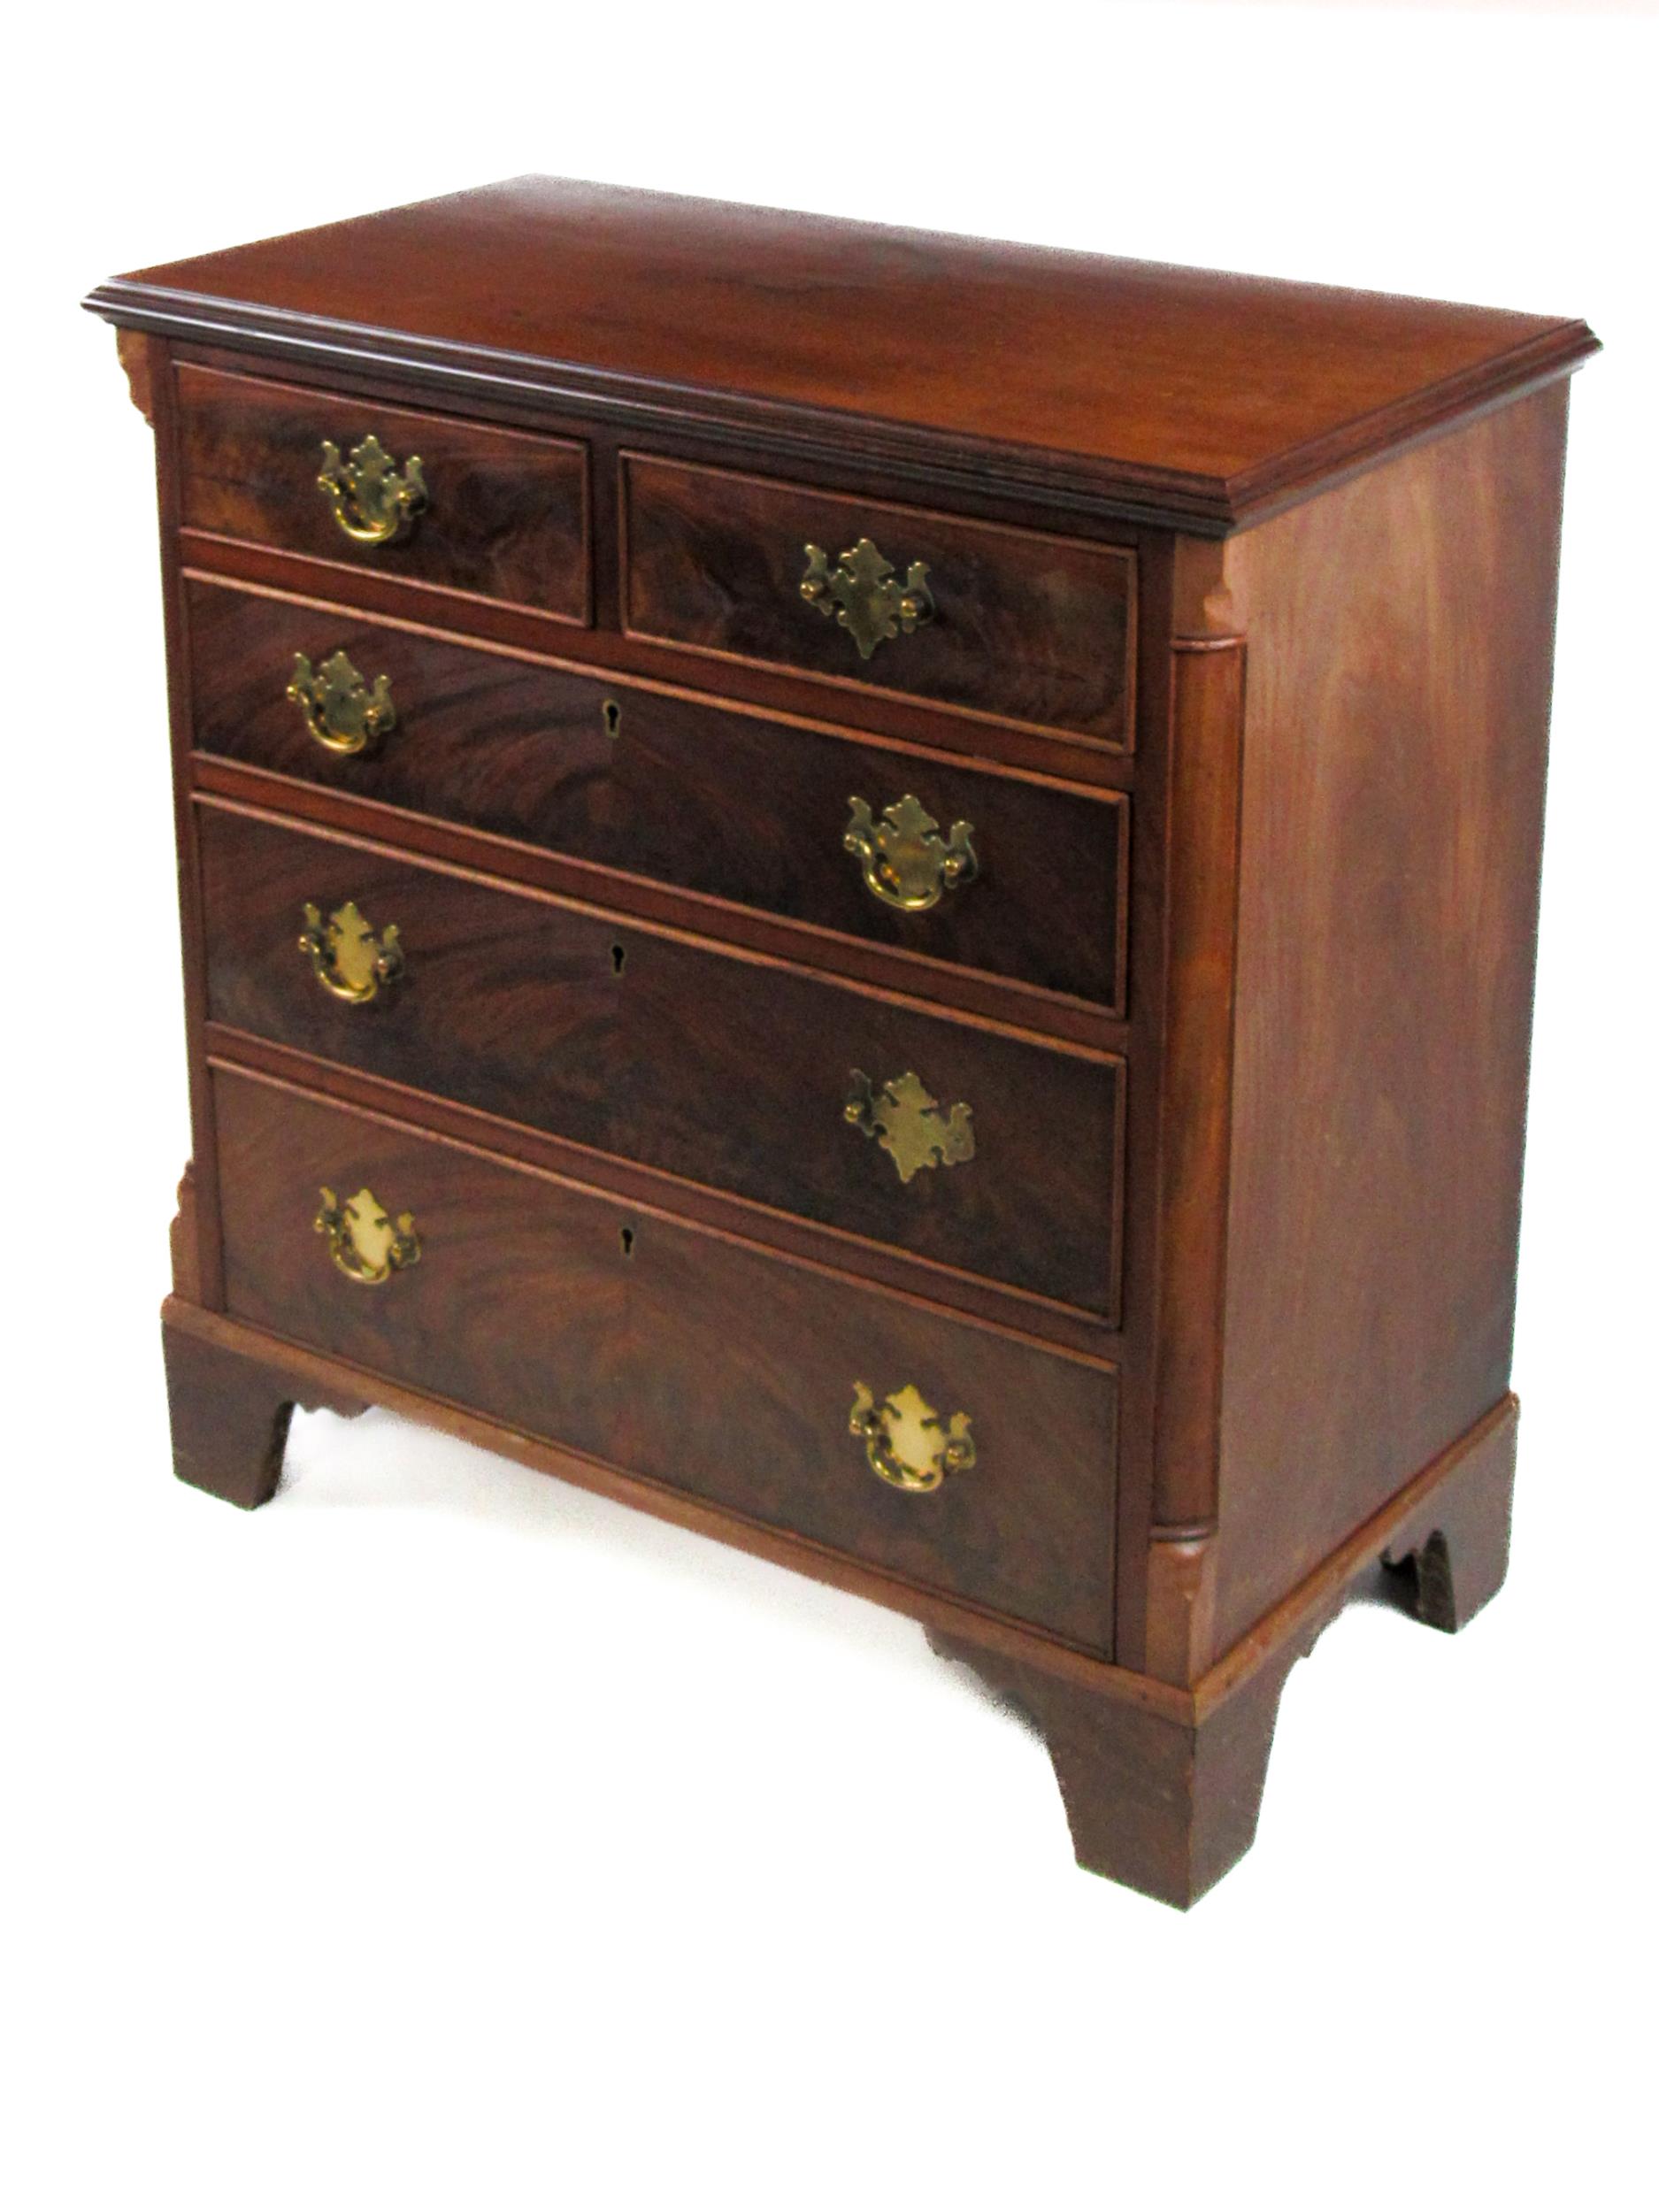 An attractive mahogany Chest, of small proportions in the Georgian style, with three long and two